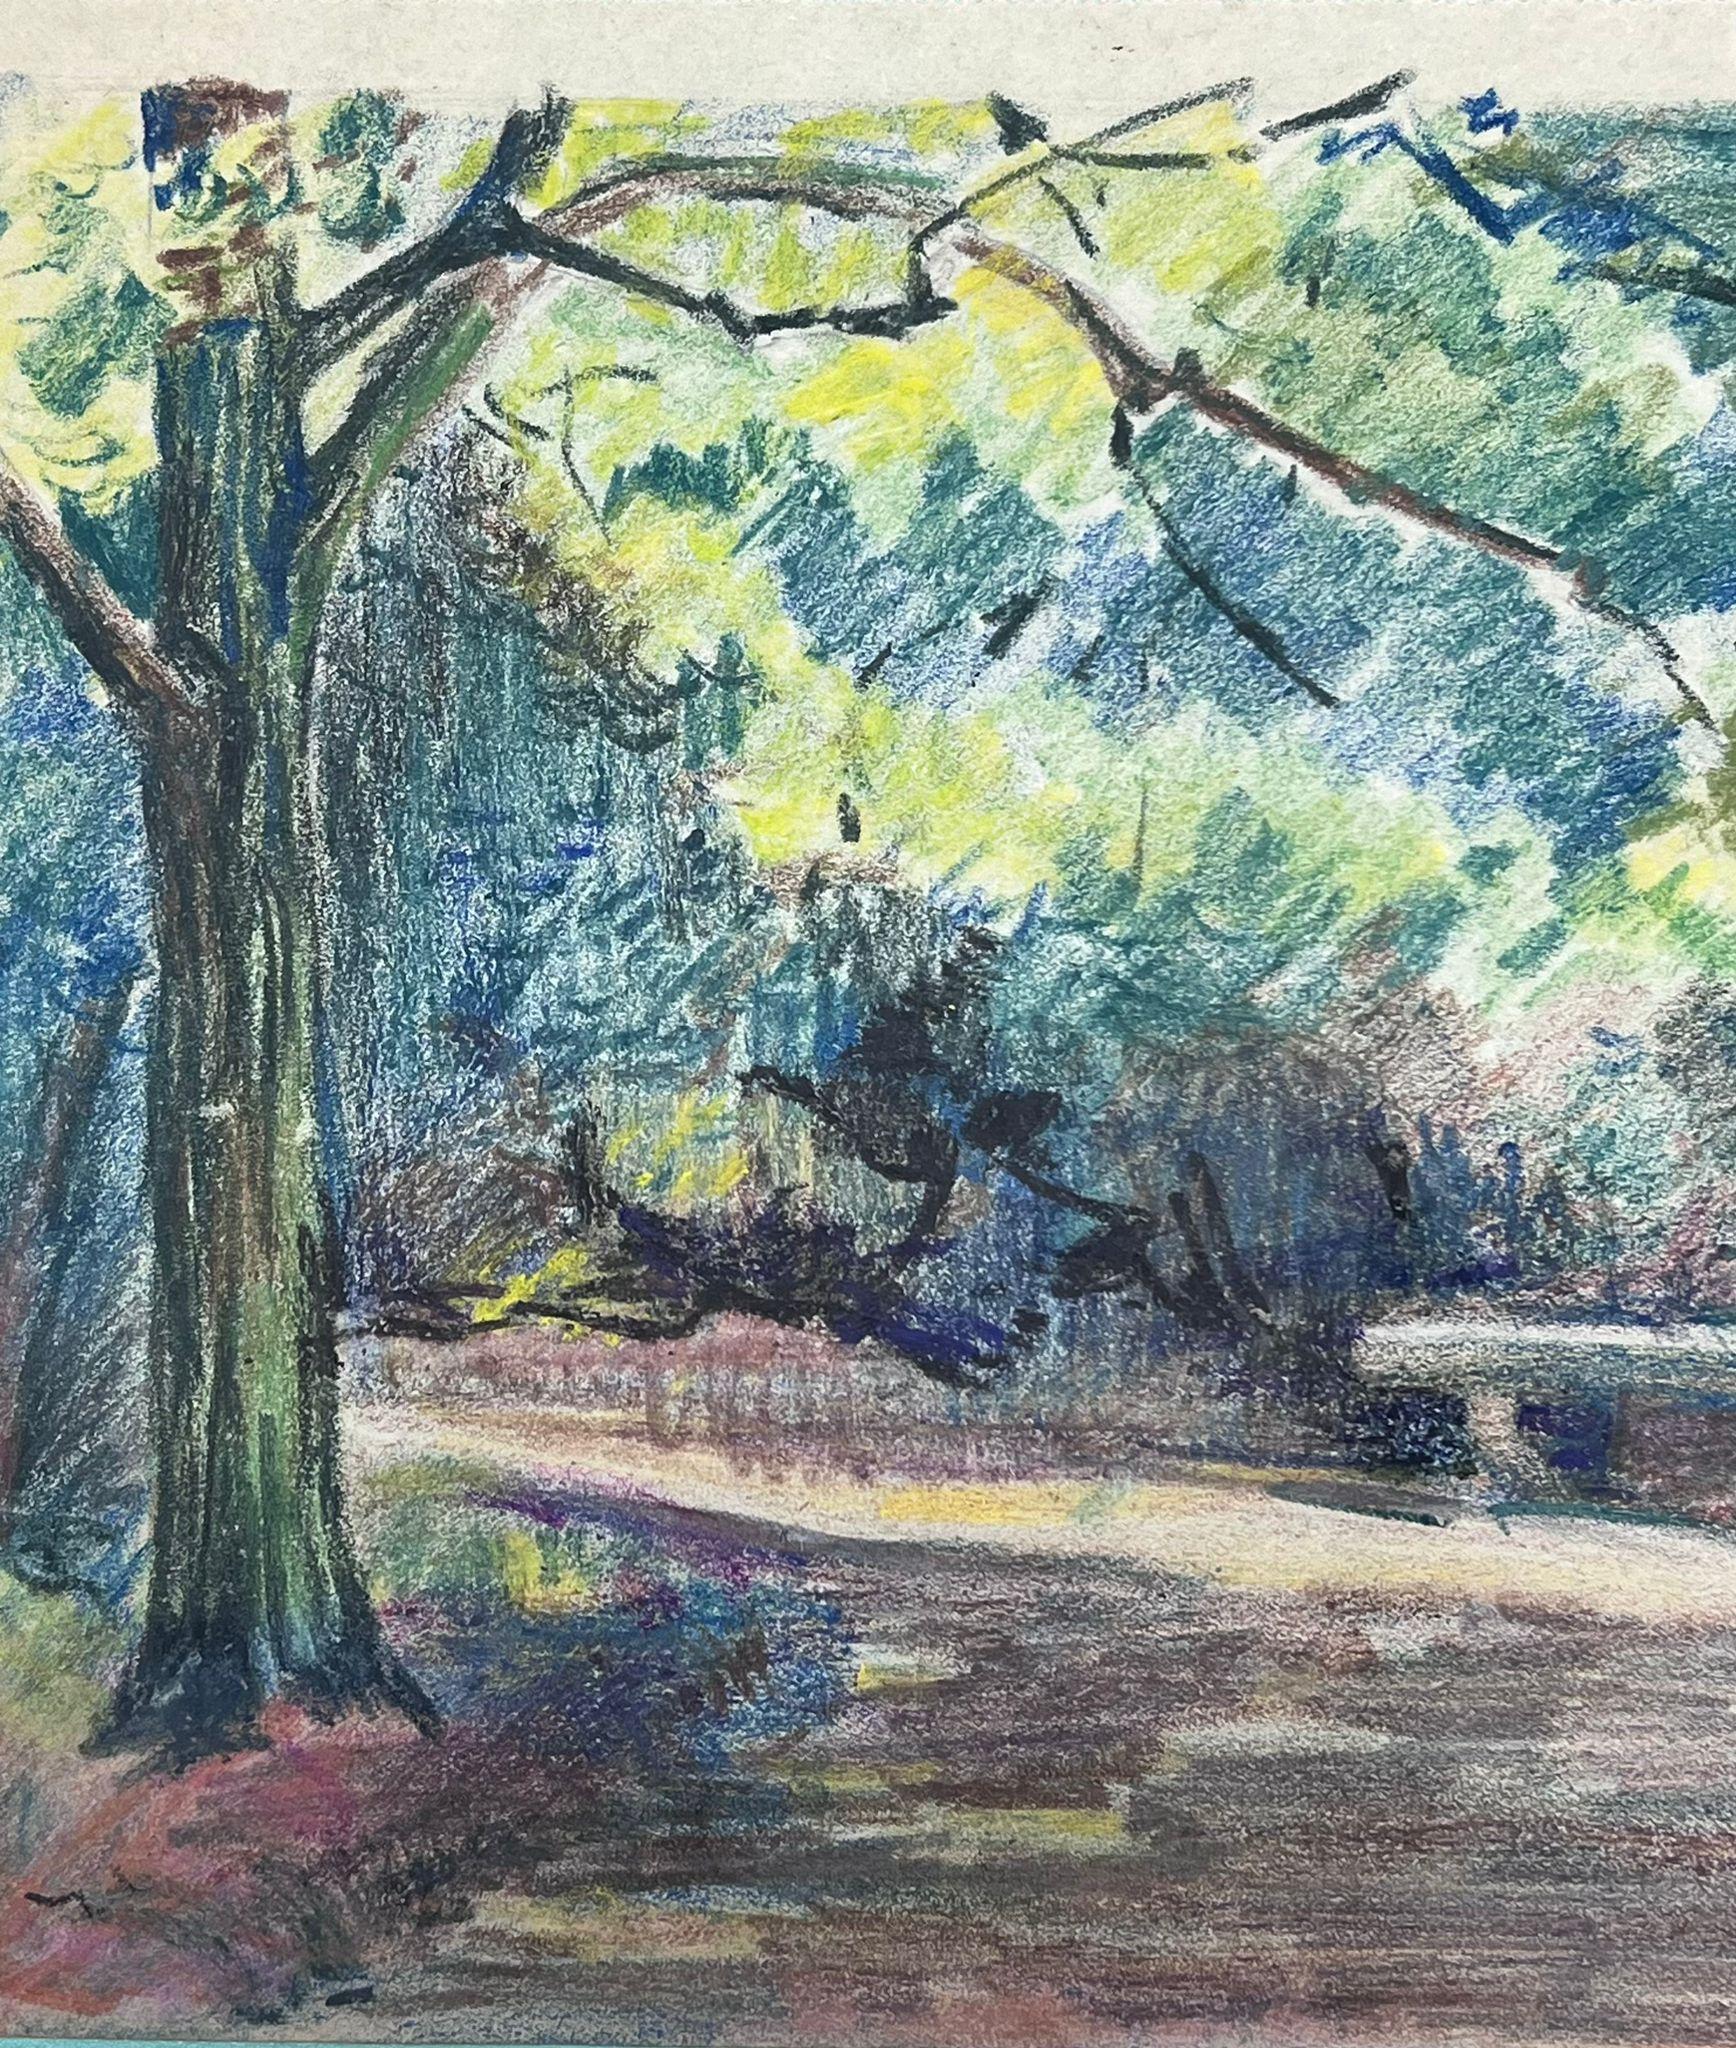 French Landscape
by Louise Alix (French, 1888-1980) *see notes below
provenance stamp to the back 
pastel drawing on artist paper, unframed
measures: 8 high by 10 inches wide
condition: overall very good and sound, a few scuffs and marks to the